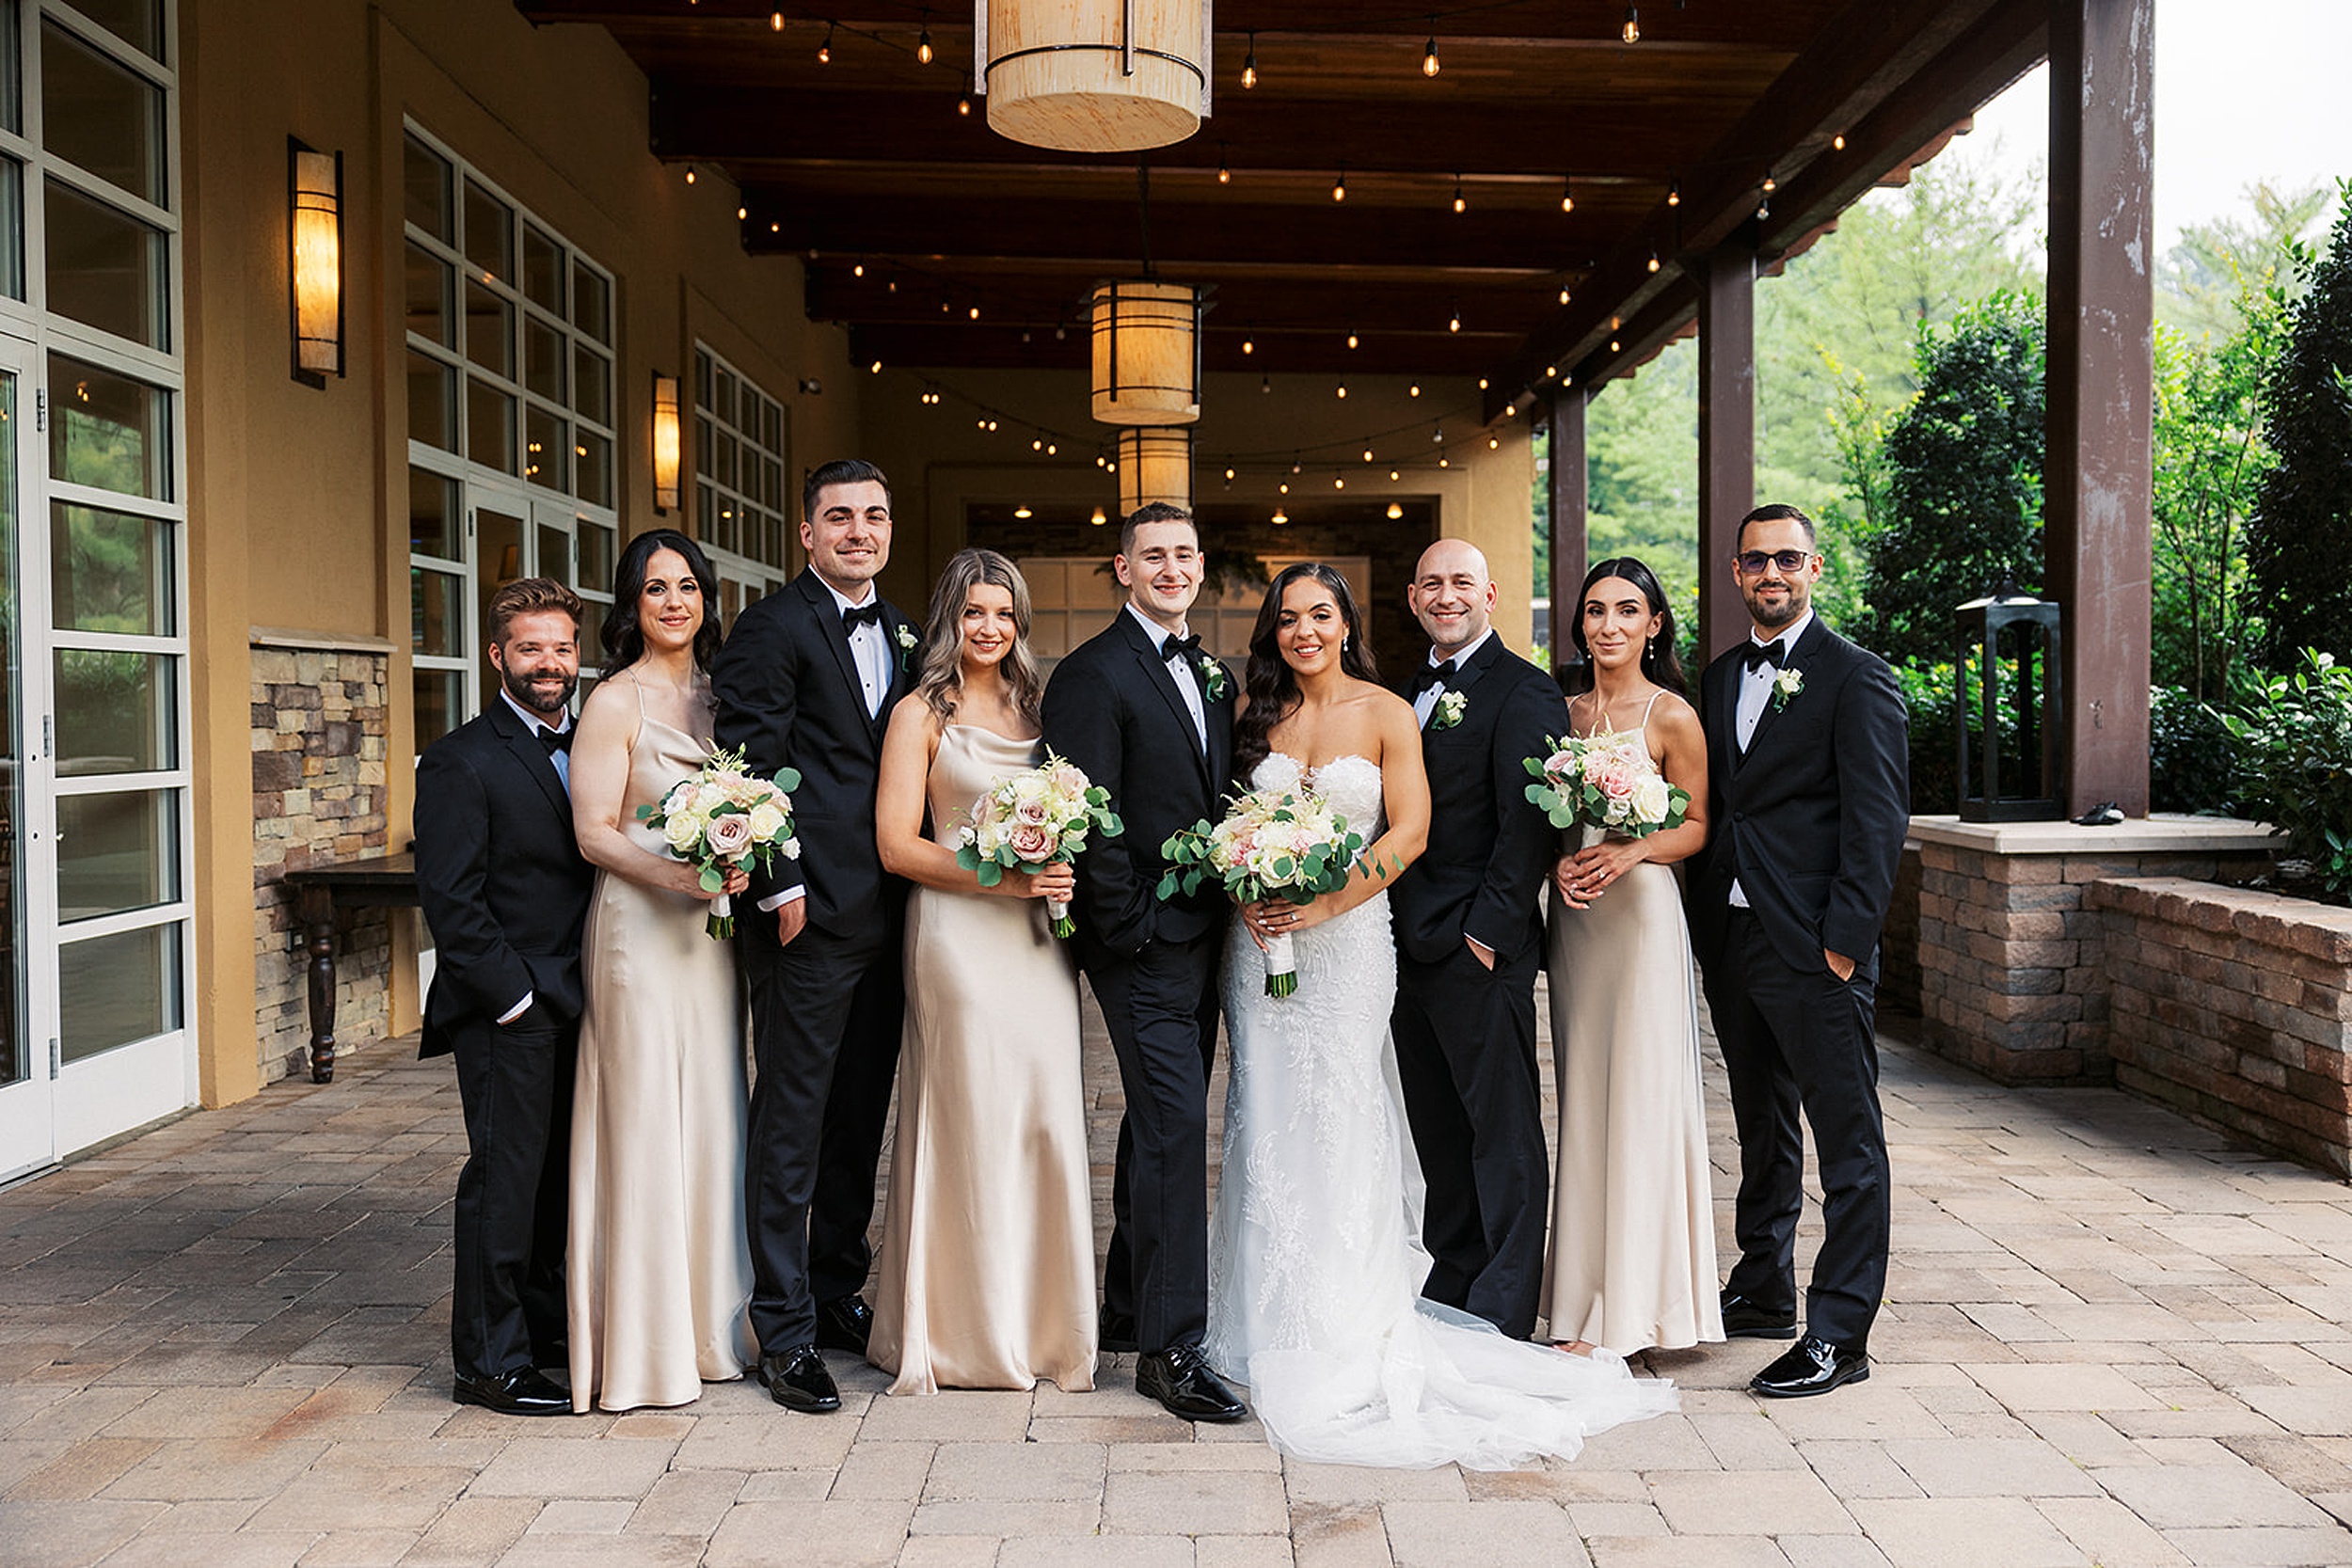 Newlyweds stand in a garden patio with their wedding party